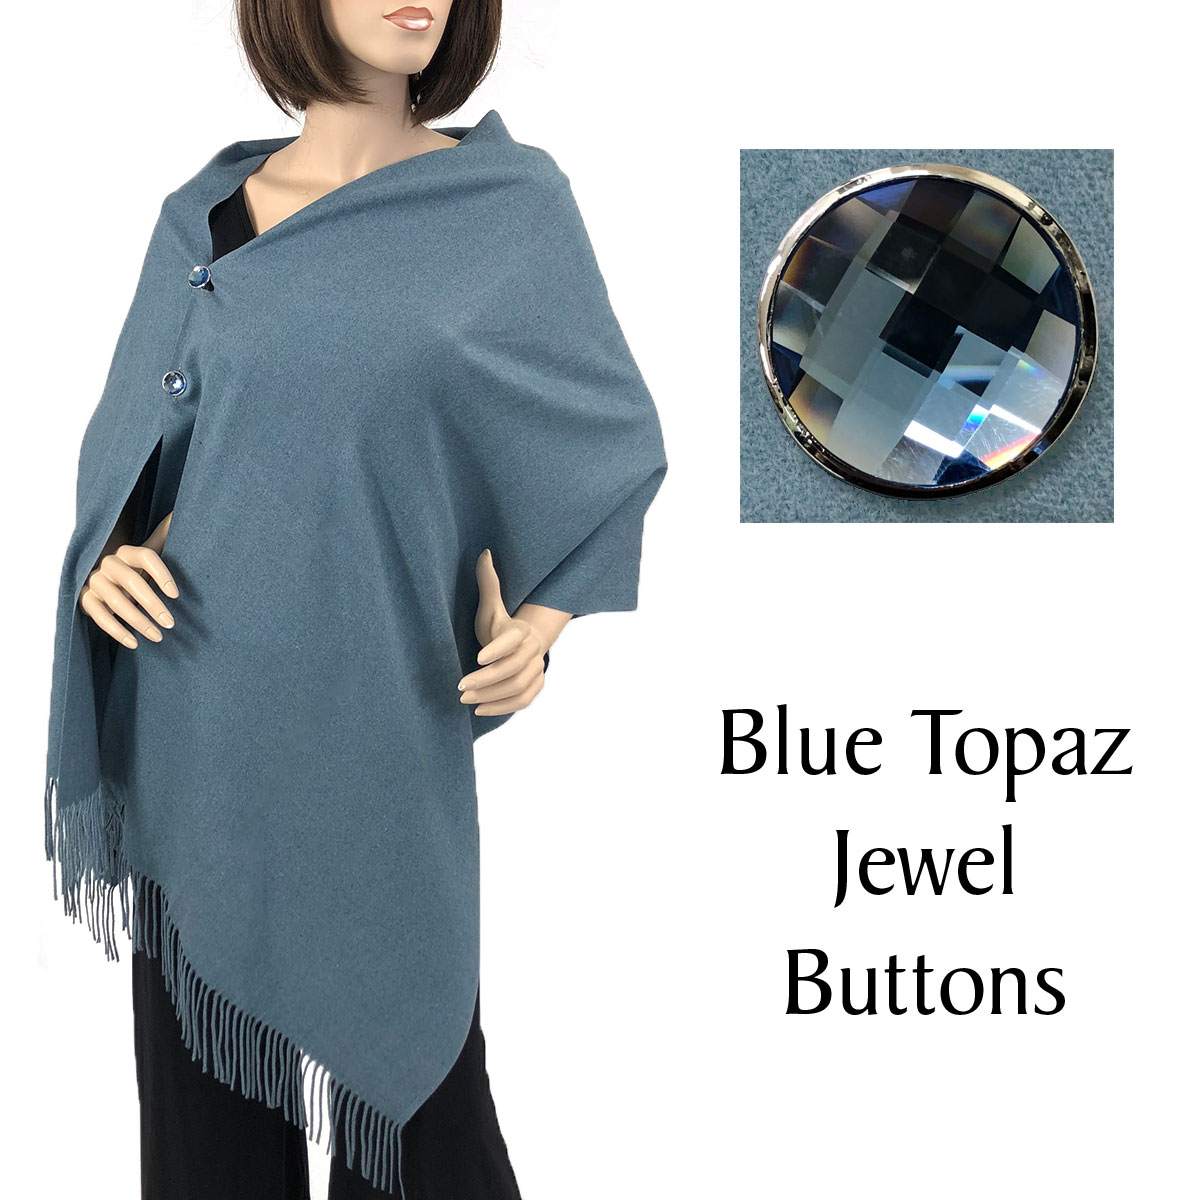 534 - Cashmere Feel Shawls w/Jeweled Buttons #25 Dusty Blue with Blue Topaz Jewel Buttons  - 29